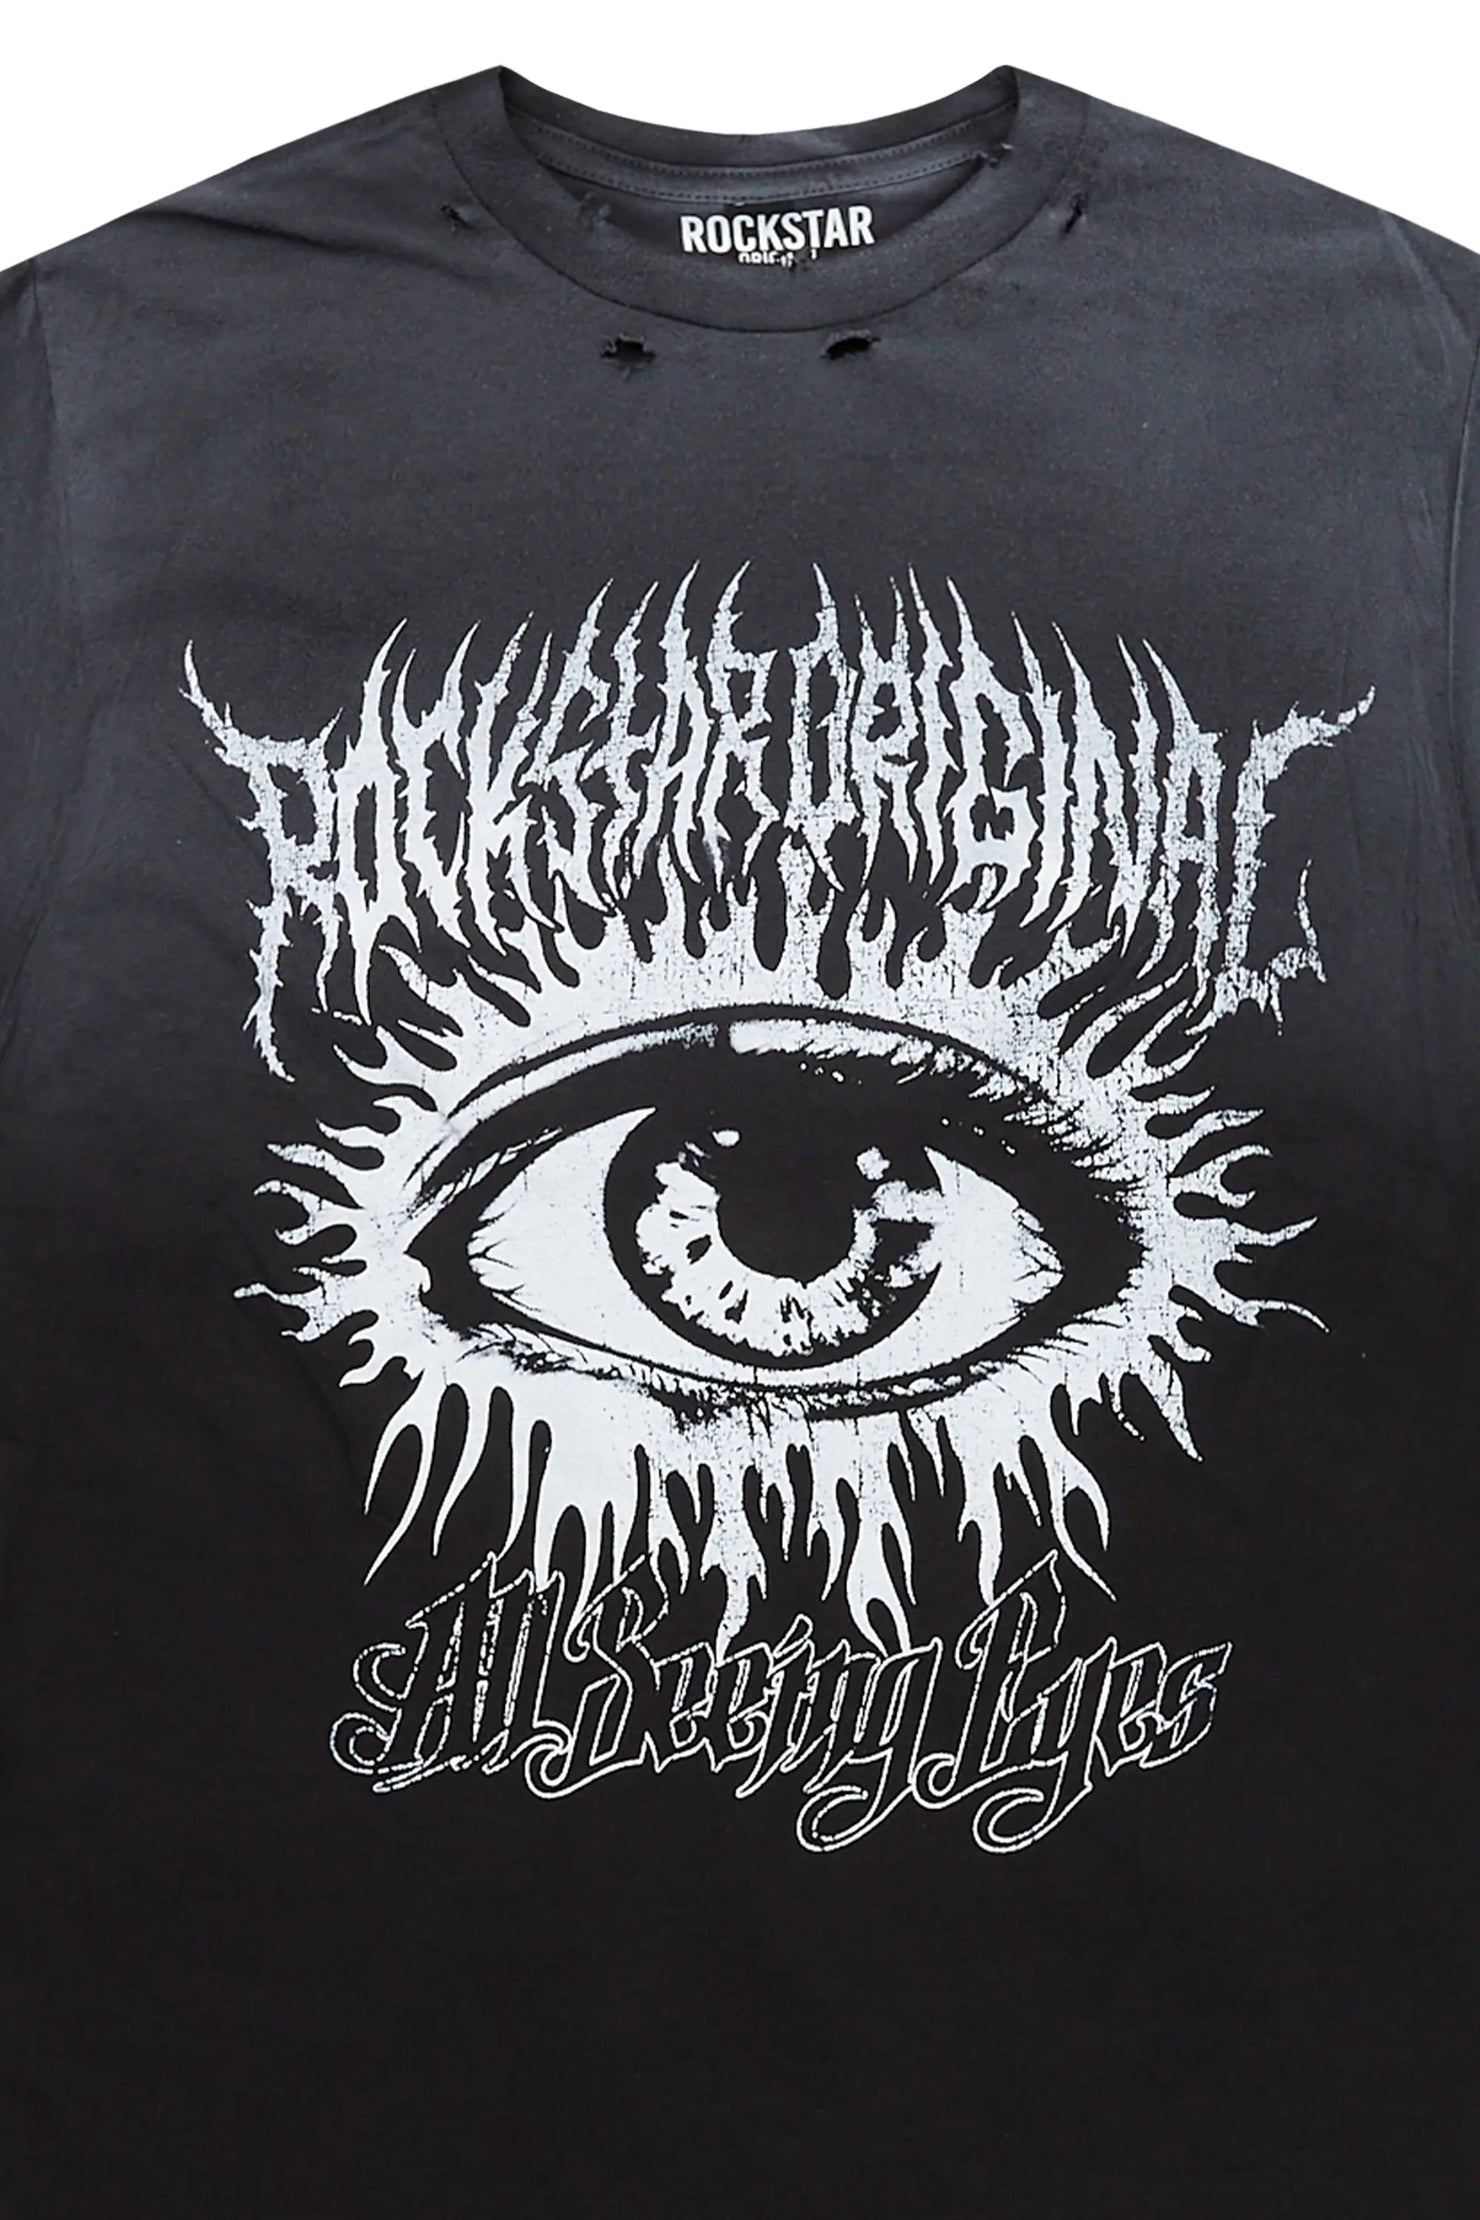 All Seeing Eyes Black Graphic T-Shirt